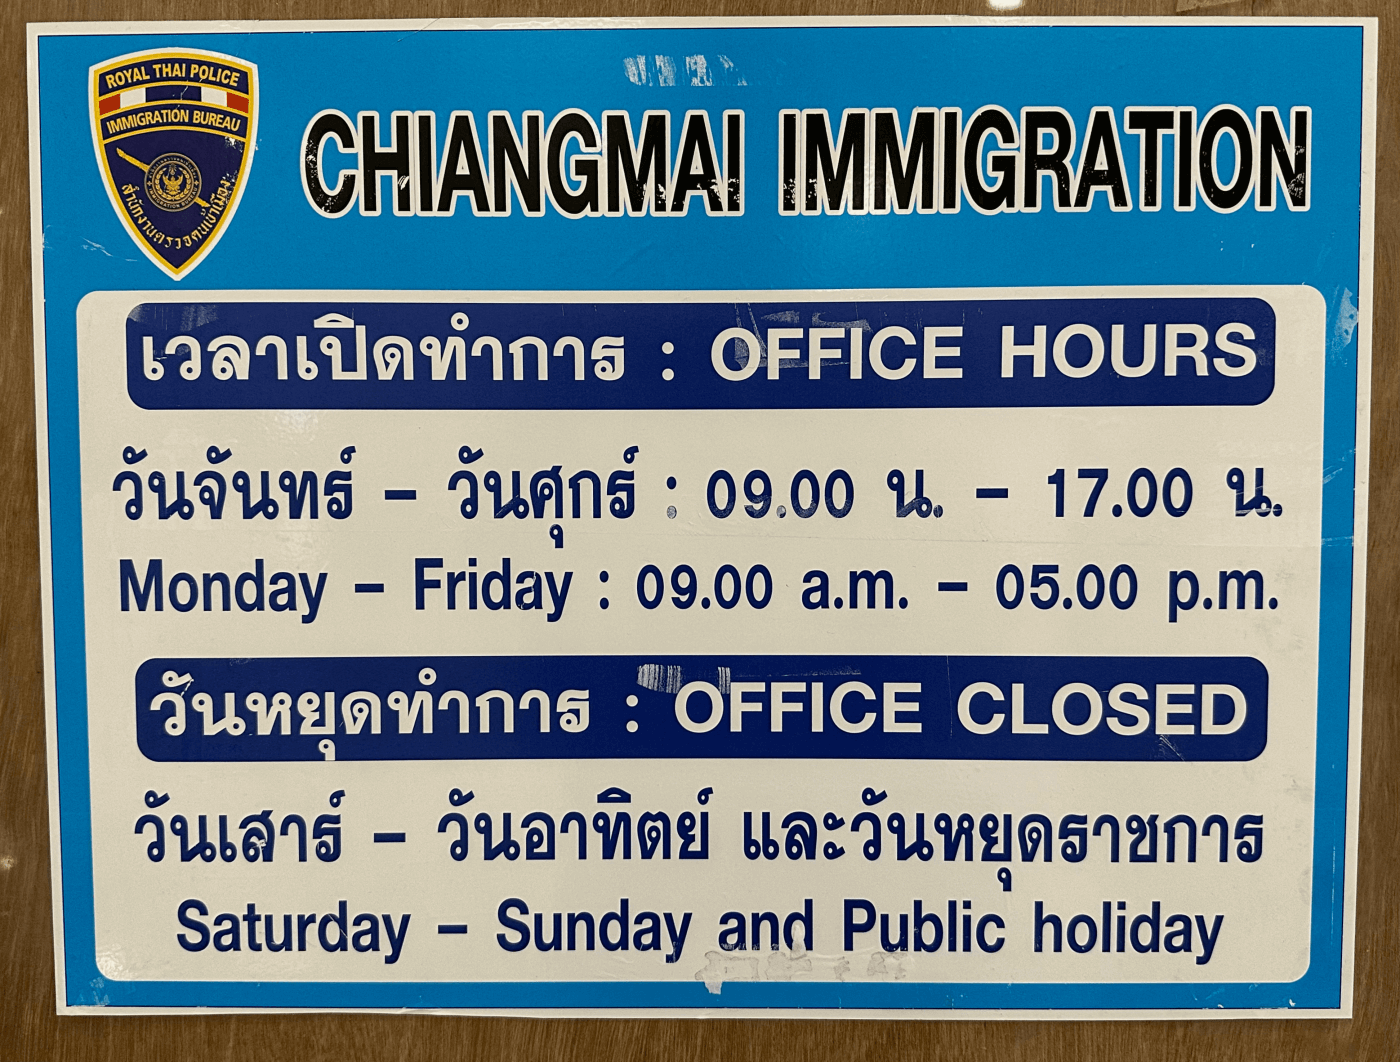 Chiang Mai immigration office hours